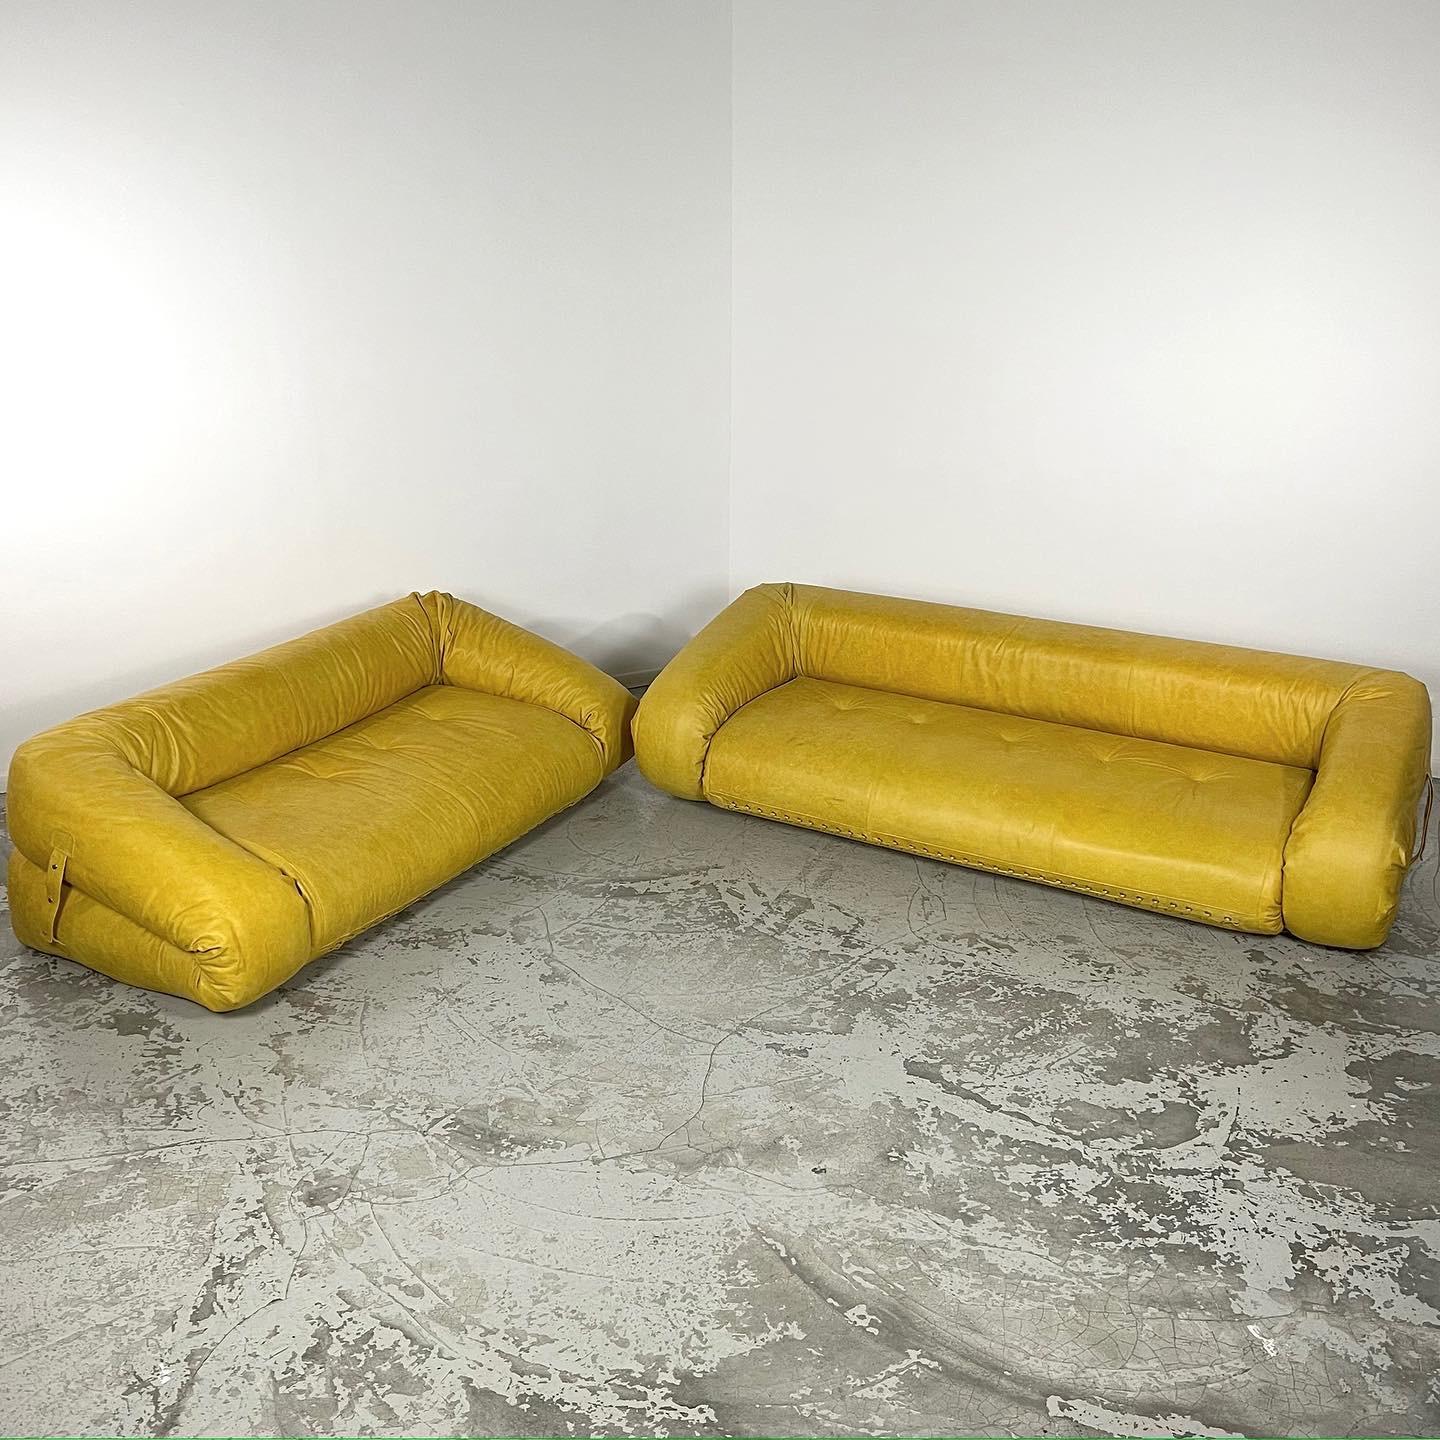 Designed in 1970, the Anfibio sofa bed is defined by critics around the world as the “art piece sofa”. This piece of furniture is characterized by
generous dimensions, enveloping shapes that invite to relaxation, comfort and sharing. This models